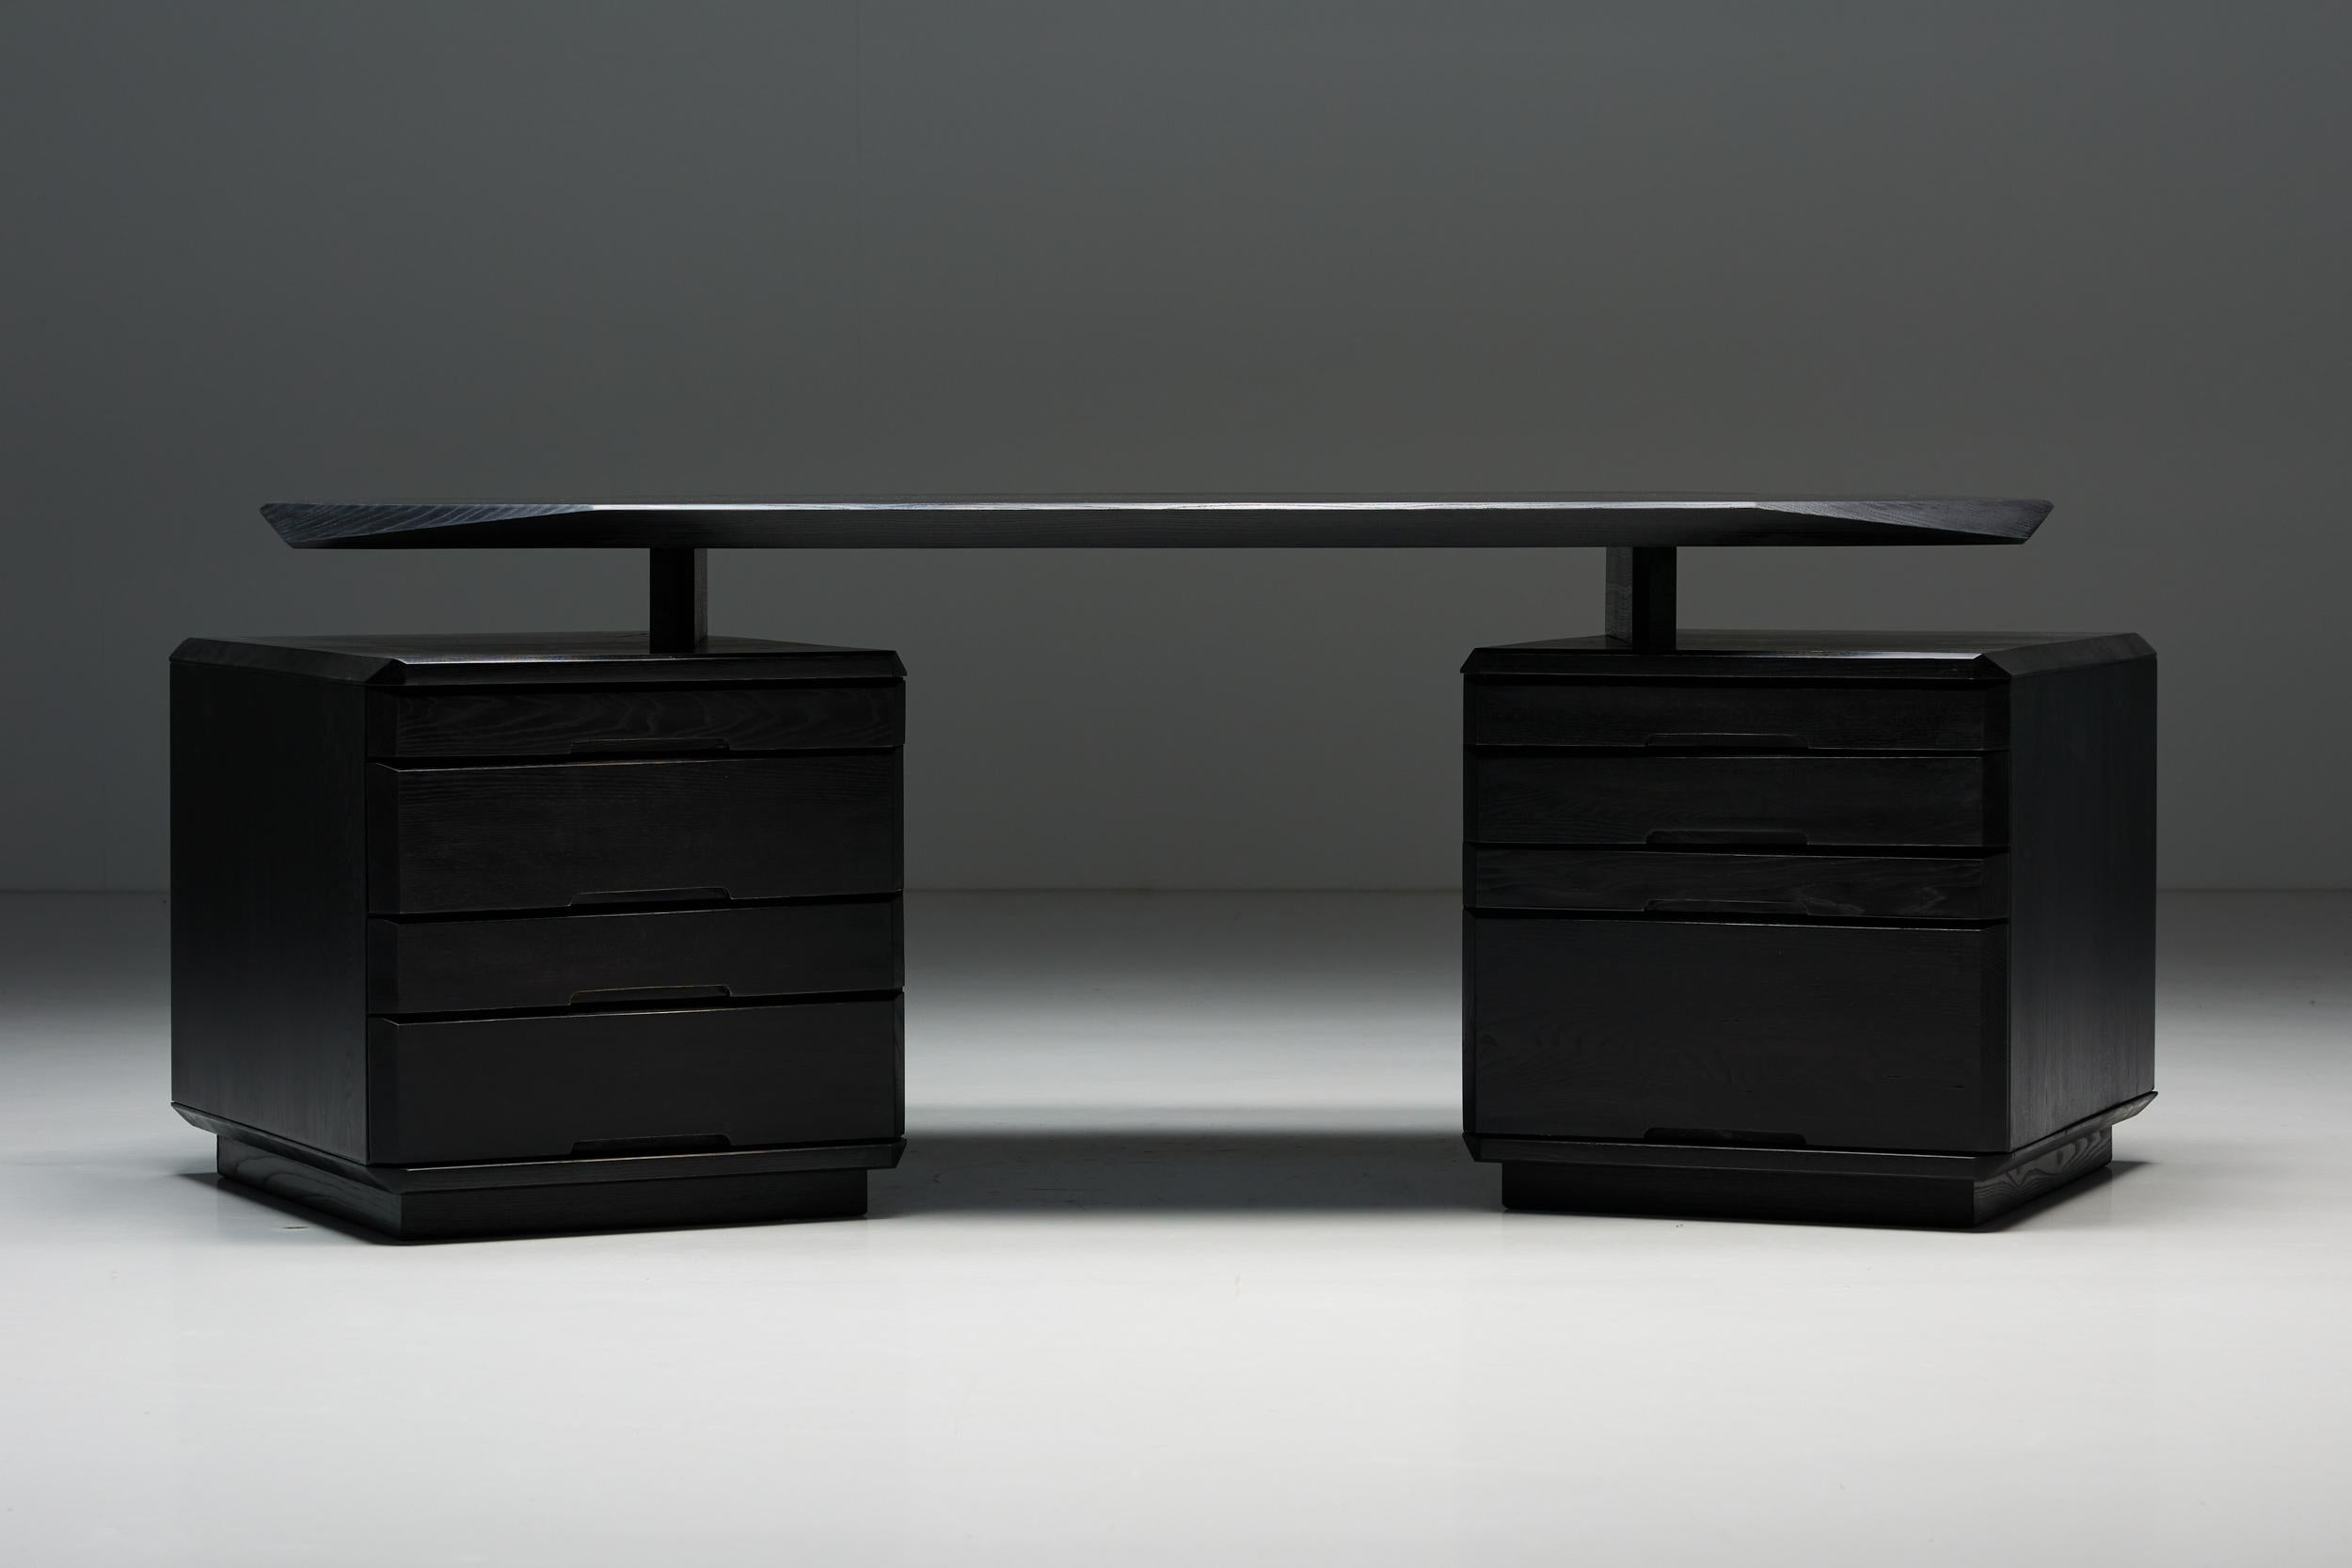 Pierre Chapo; B40 desk; Elm; France; 1970s; Mid-Century Modern, Rustic; Postmodern; Cabinets; Black ash;

Exceptional B40 desk by Pierre Chapo crafted from solid elmwood in black ash. This piece dates back to the 1970s and adds a vintage touch to